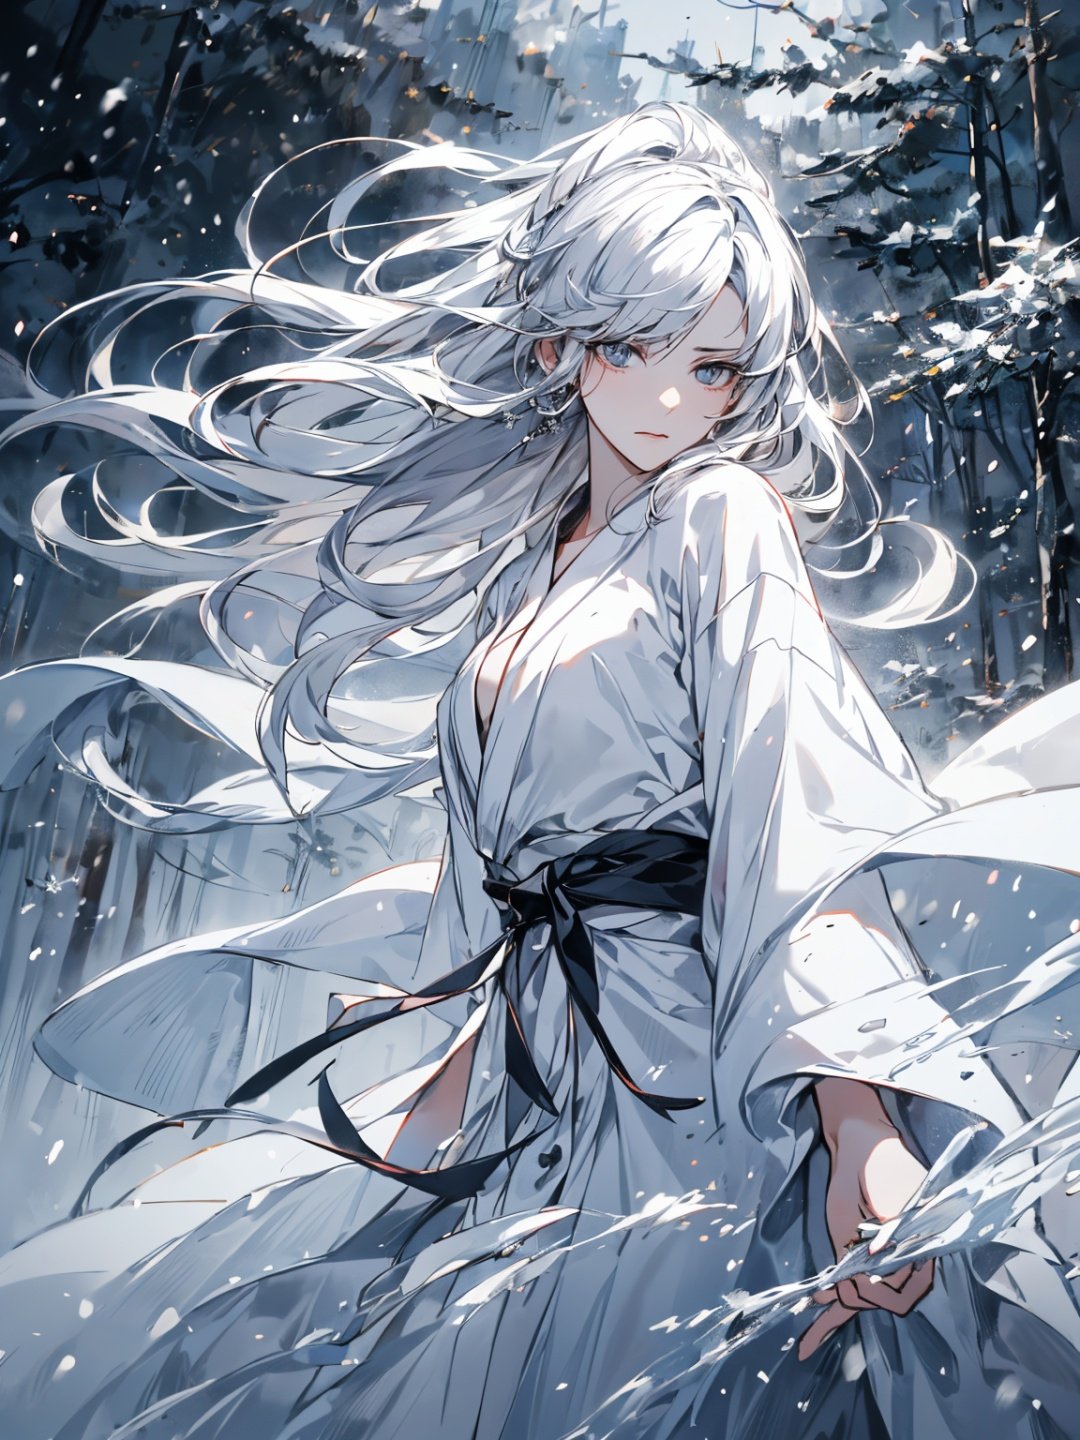 High quality, realistic, dark background, high-resolution, soft focus, (snowflake: 1.5), 1 girl, (mist: 1.5) (deep in the forest), (snowflake falling), (snowlight), (blizzard), (snowstorm), (ghost of a beautiful snowwoman, black long hair, white and silver bathrobes), anger, anger, melancholy, trembling black hair, shiny hair, glowing skin, beautiful and beautiful, charming, Chaos, Depth of Field, (Ghost: 1.5), (Lost in Anger, Forgetting Cold), (Arms Stretching Forward), (Monochrome: 1.5), (Black and White: 1.5)